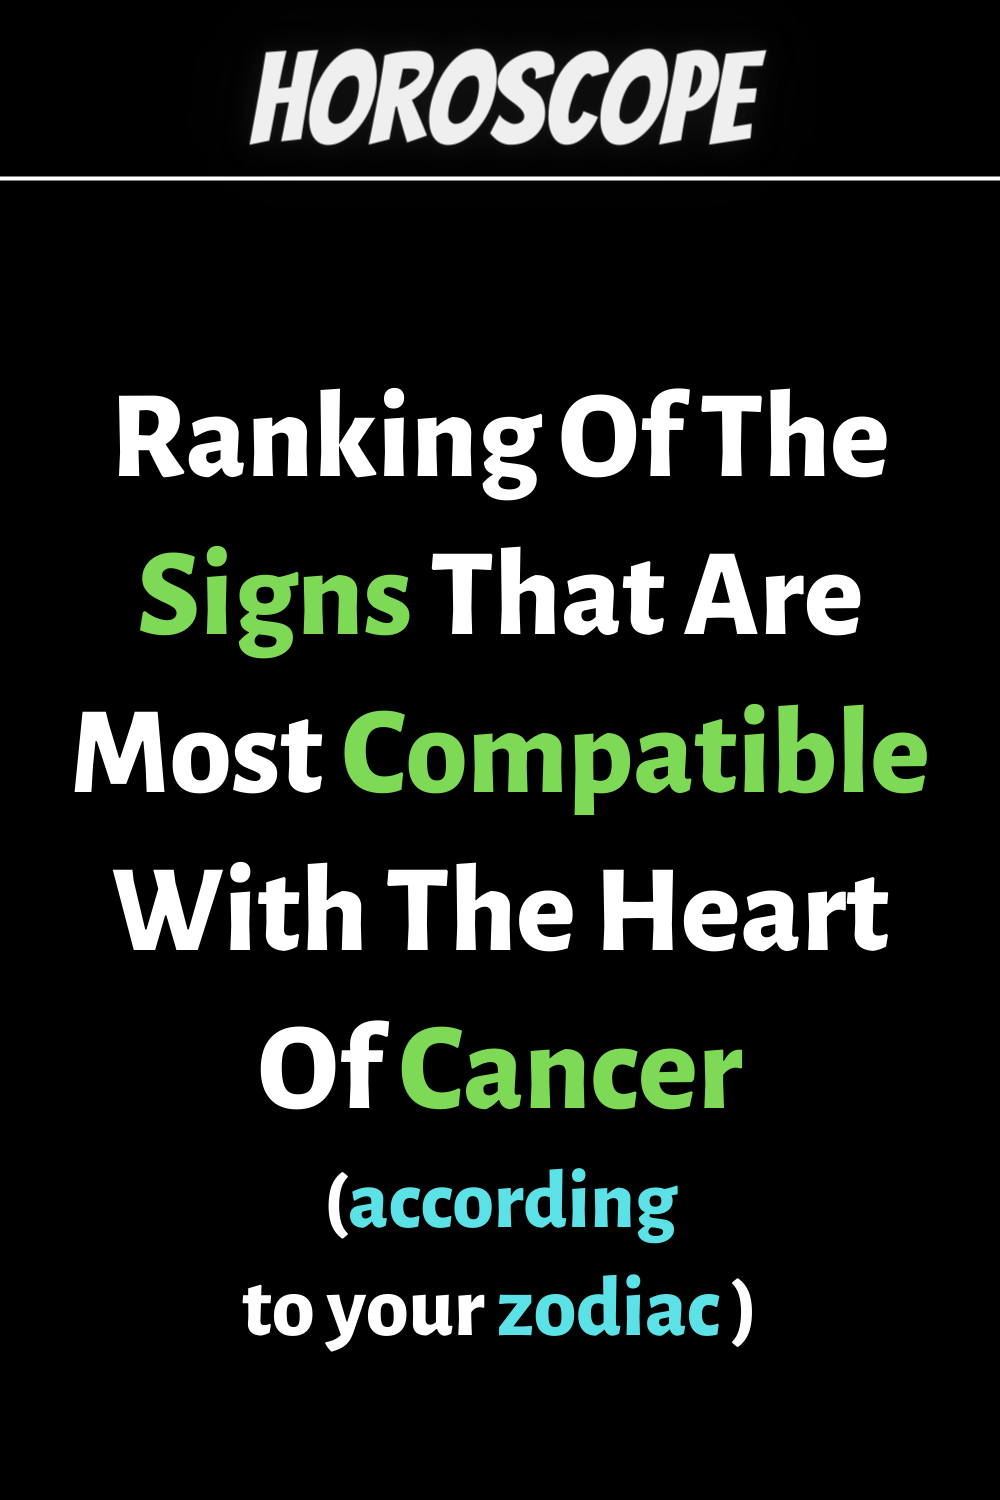 Ranking Of The Signs That Are Most Compatible With The Heart Of Cancer